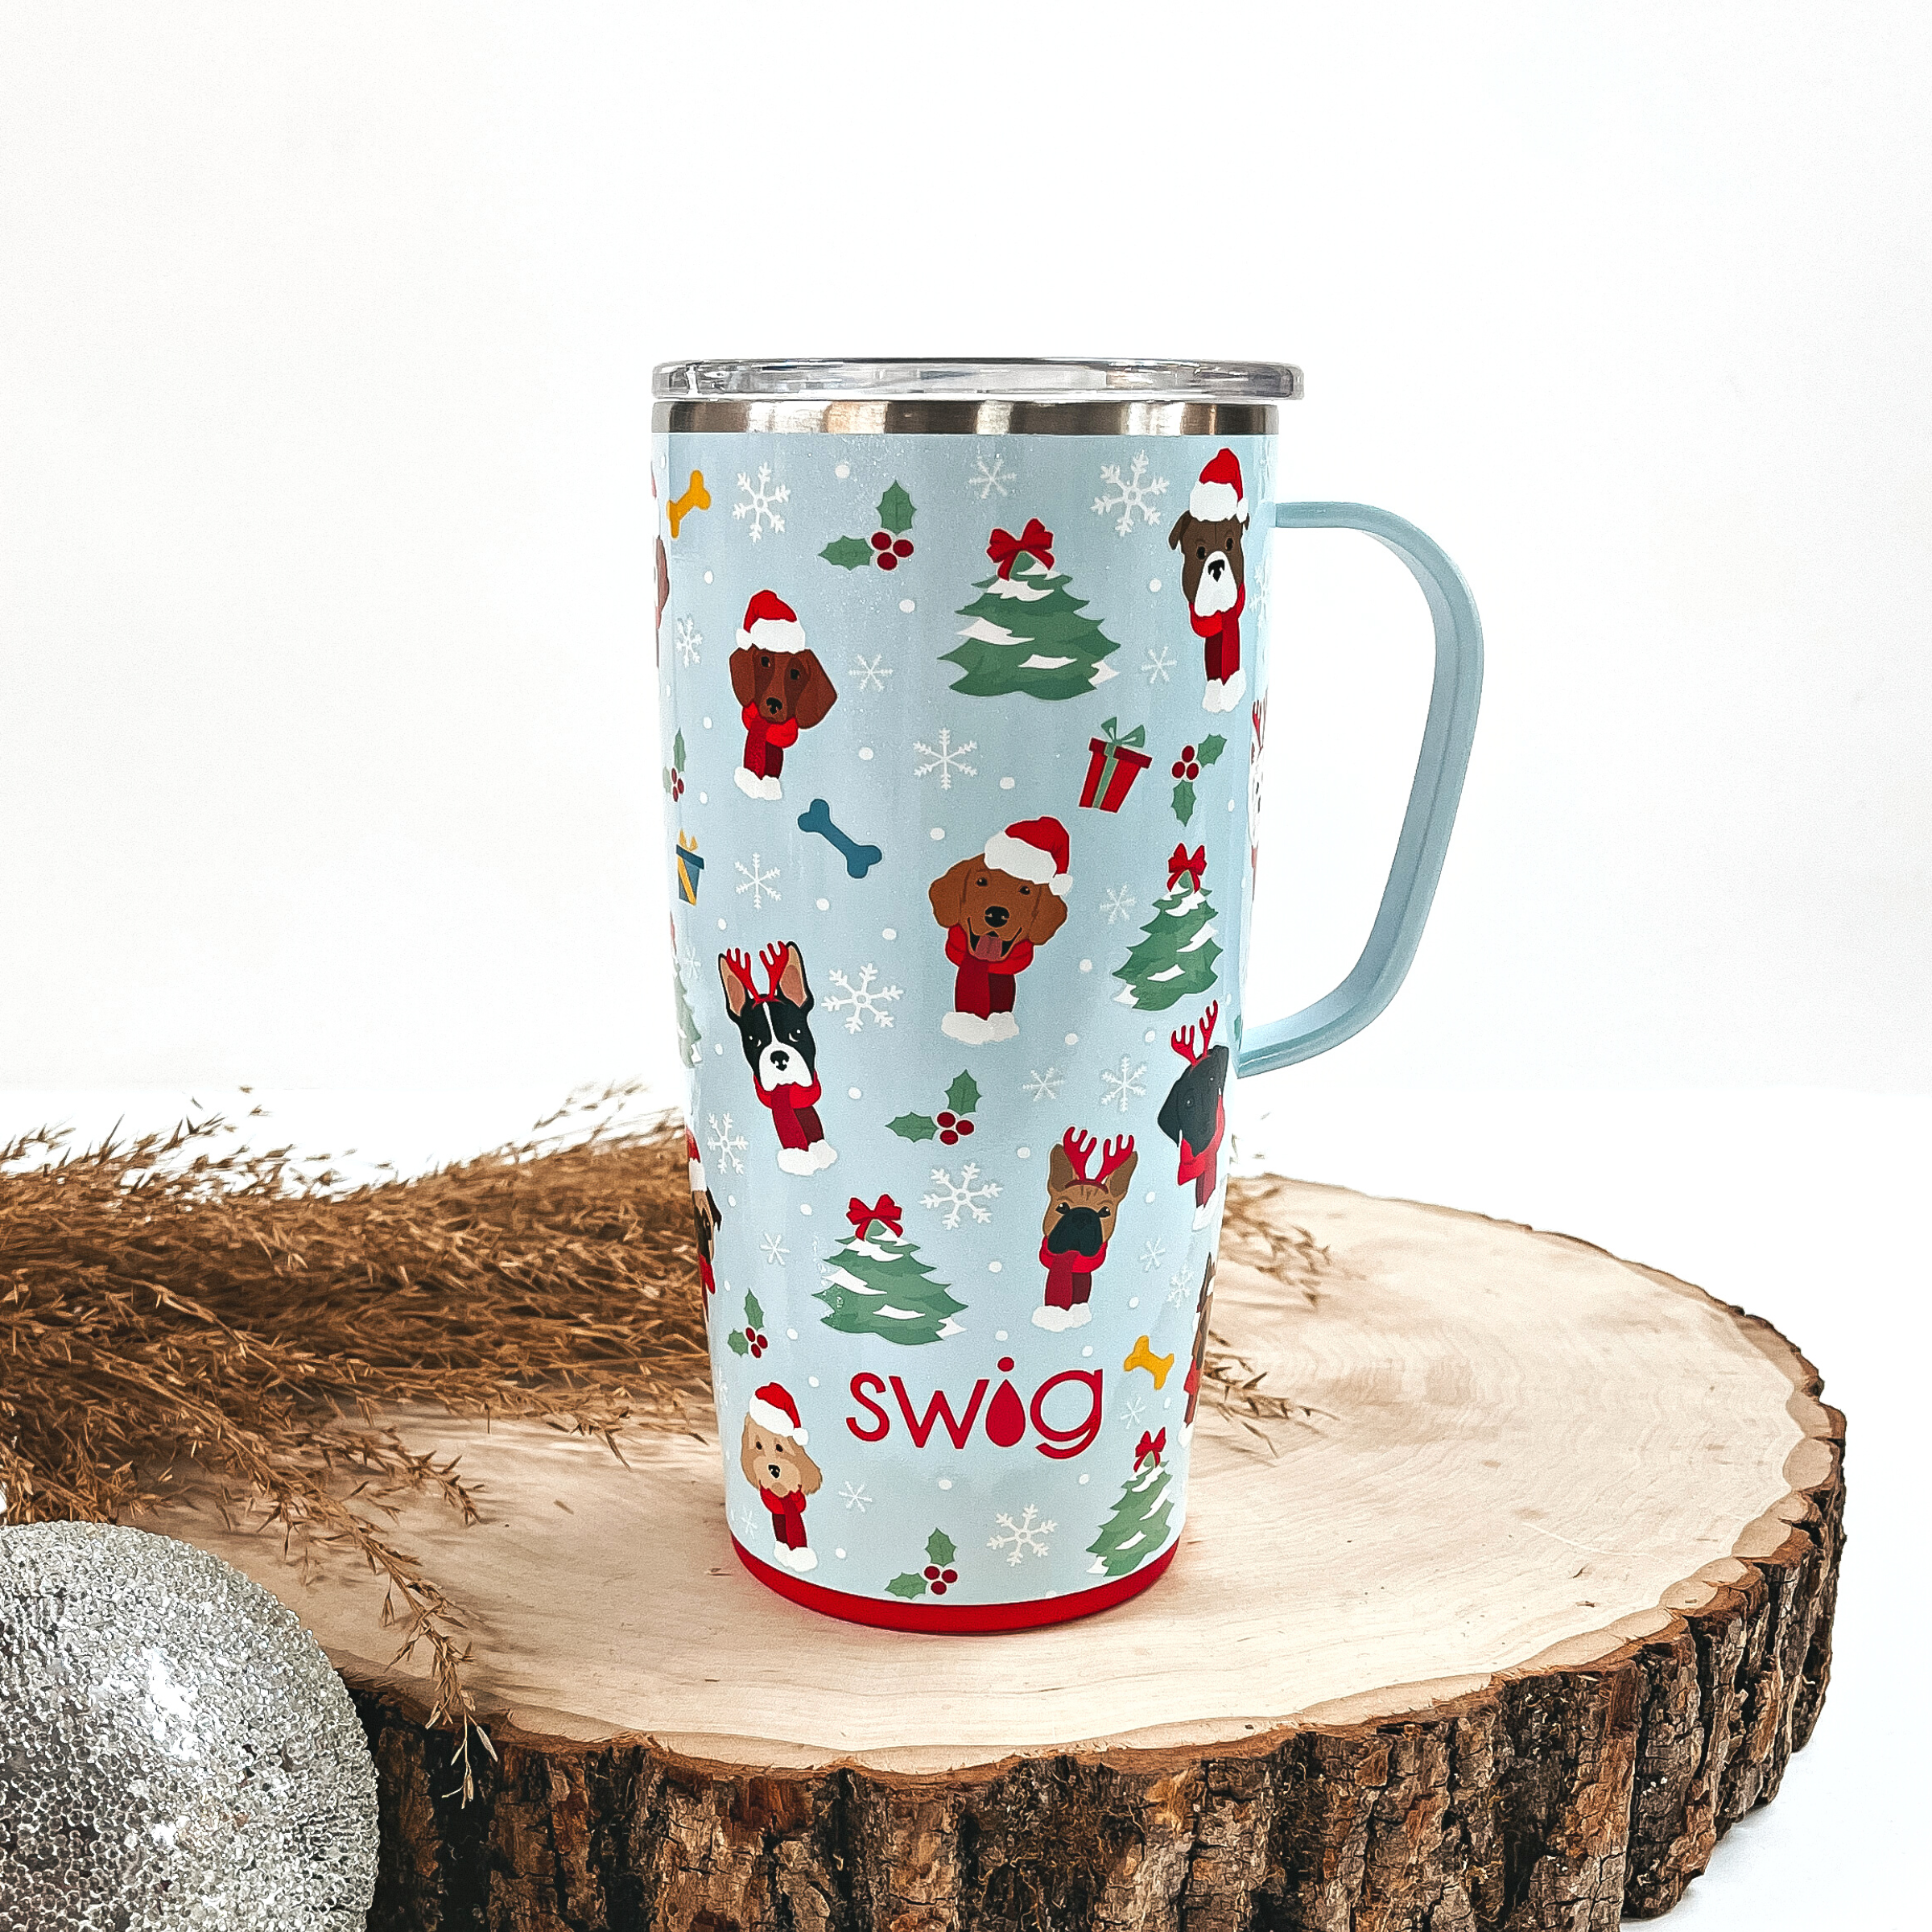 This is a light blue cup with a handle, a red top and bottom, with different kinds  of dogs, christmas tree's, snowflakes, mistletoes, and presents all over.  This cup is taken on top of a slab of wood and on a white background, with  a silver ornament and brown plant in the back as decor.